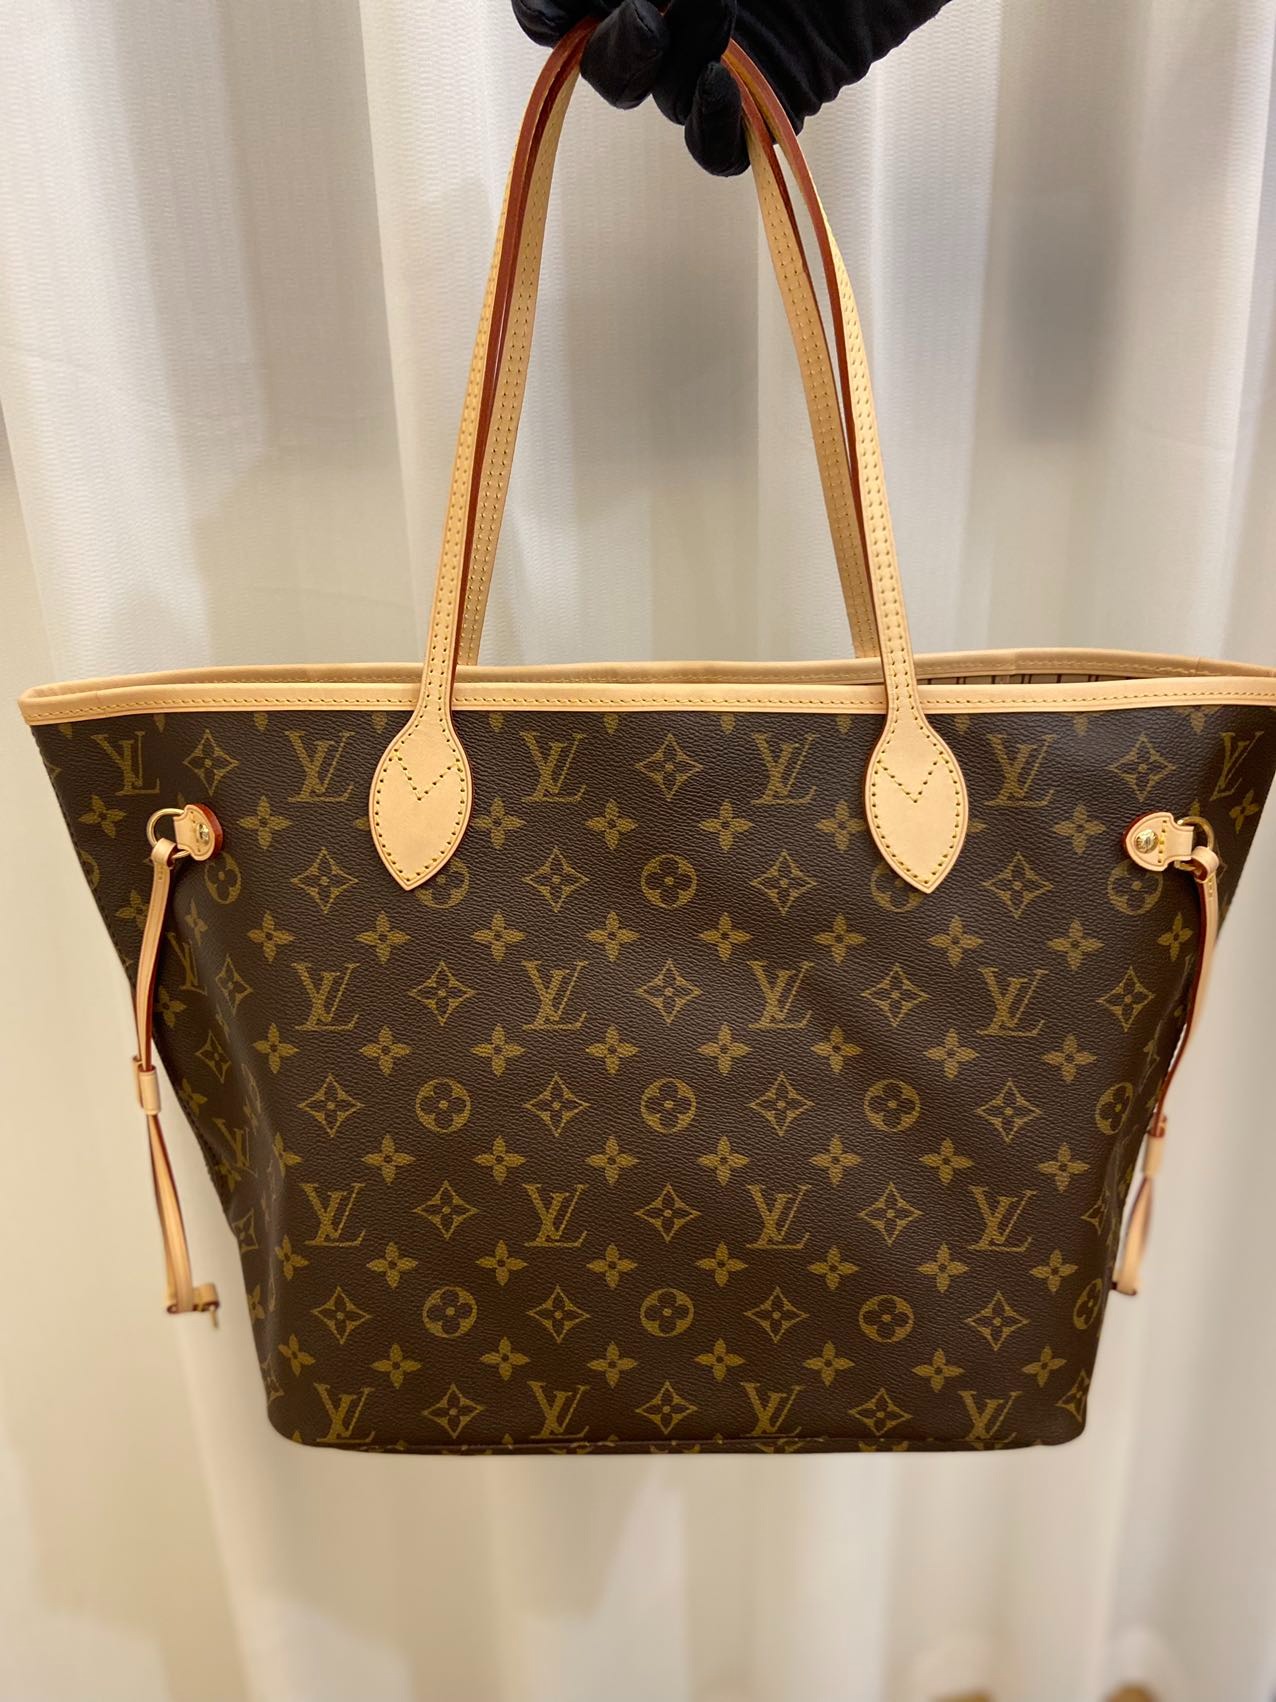 Louis Vuitton Neverfull MM Pivoine - One Year Wear and Tear Review 